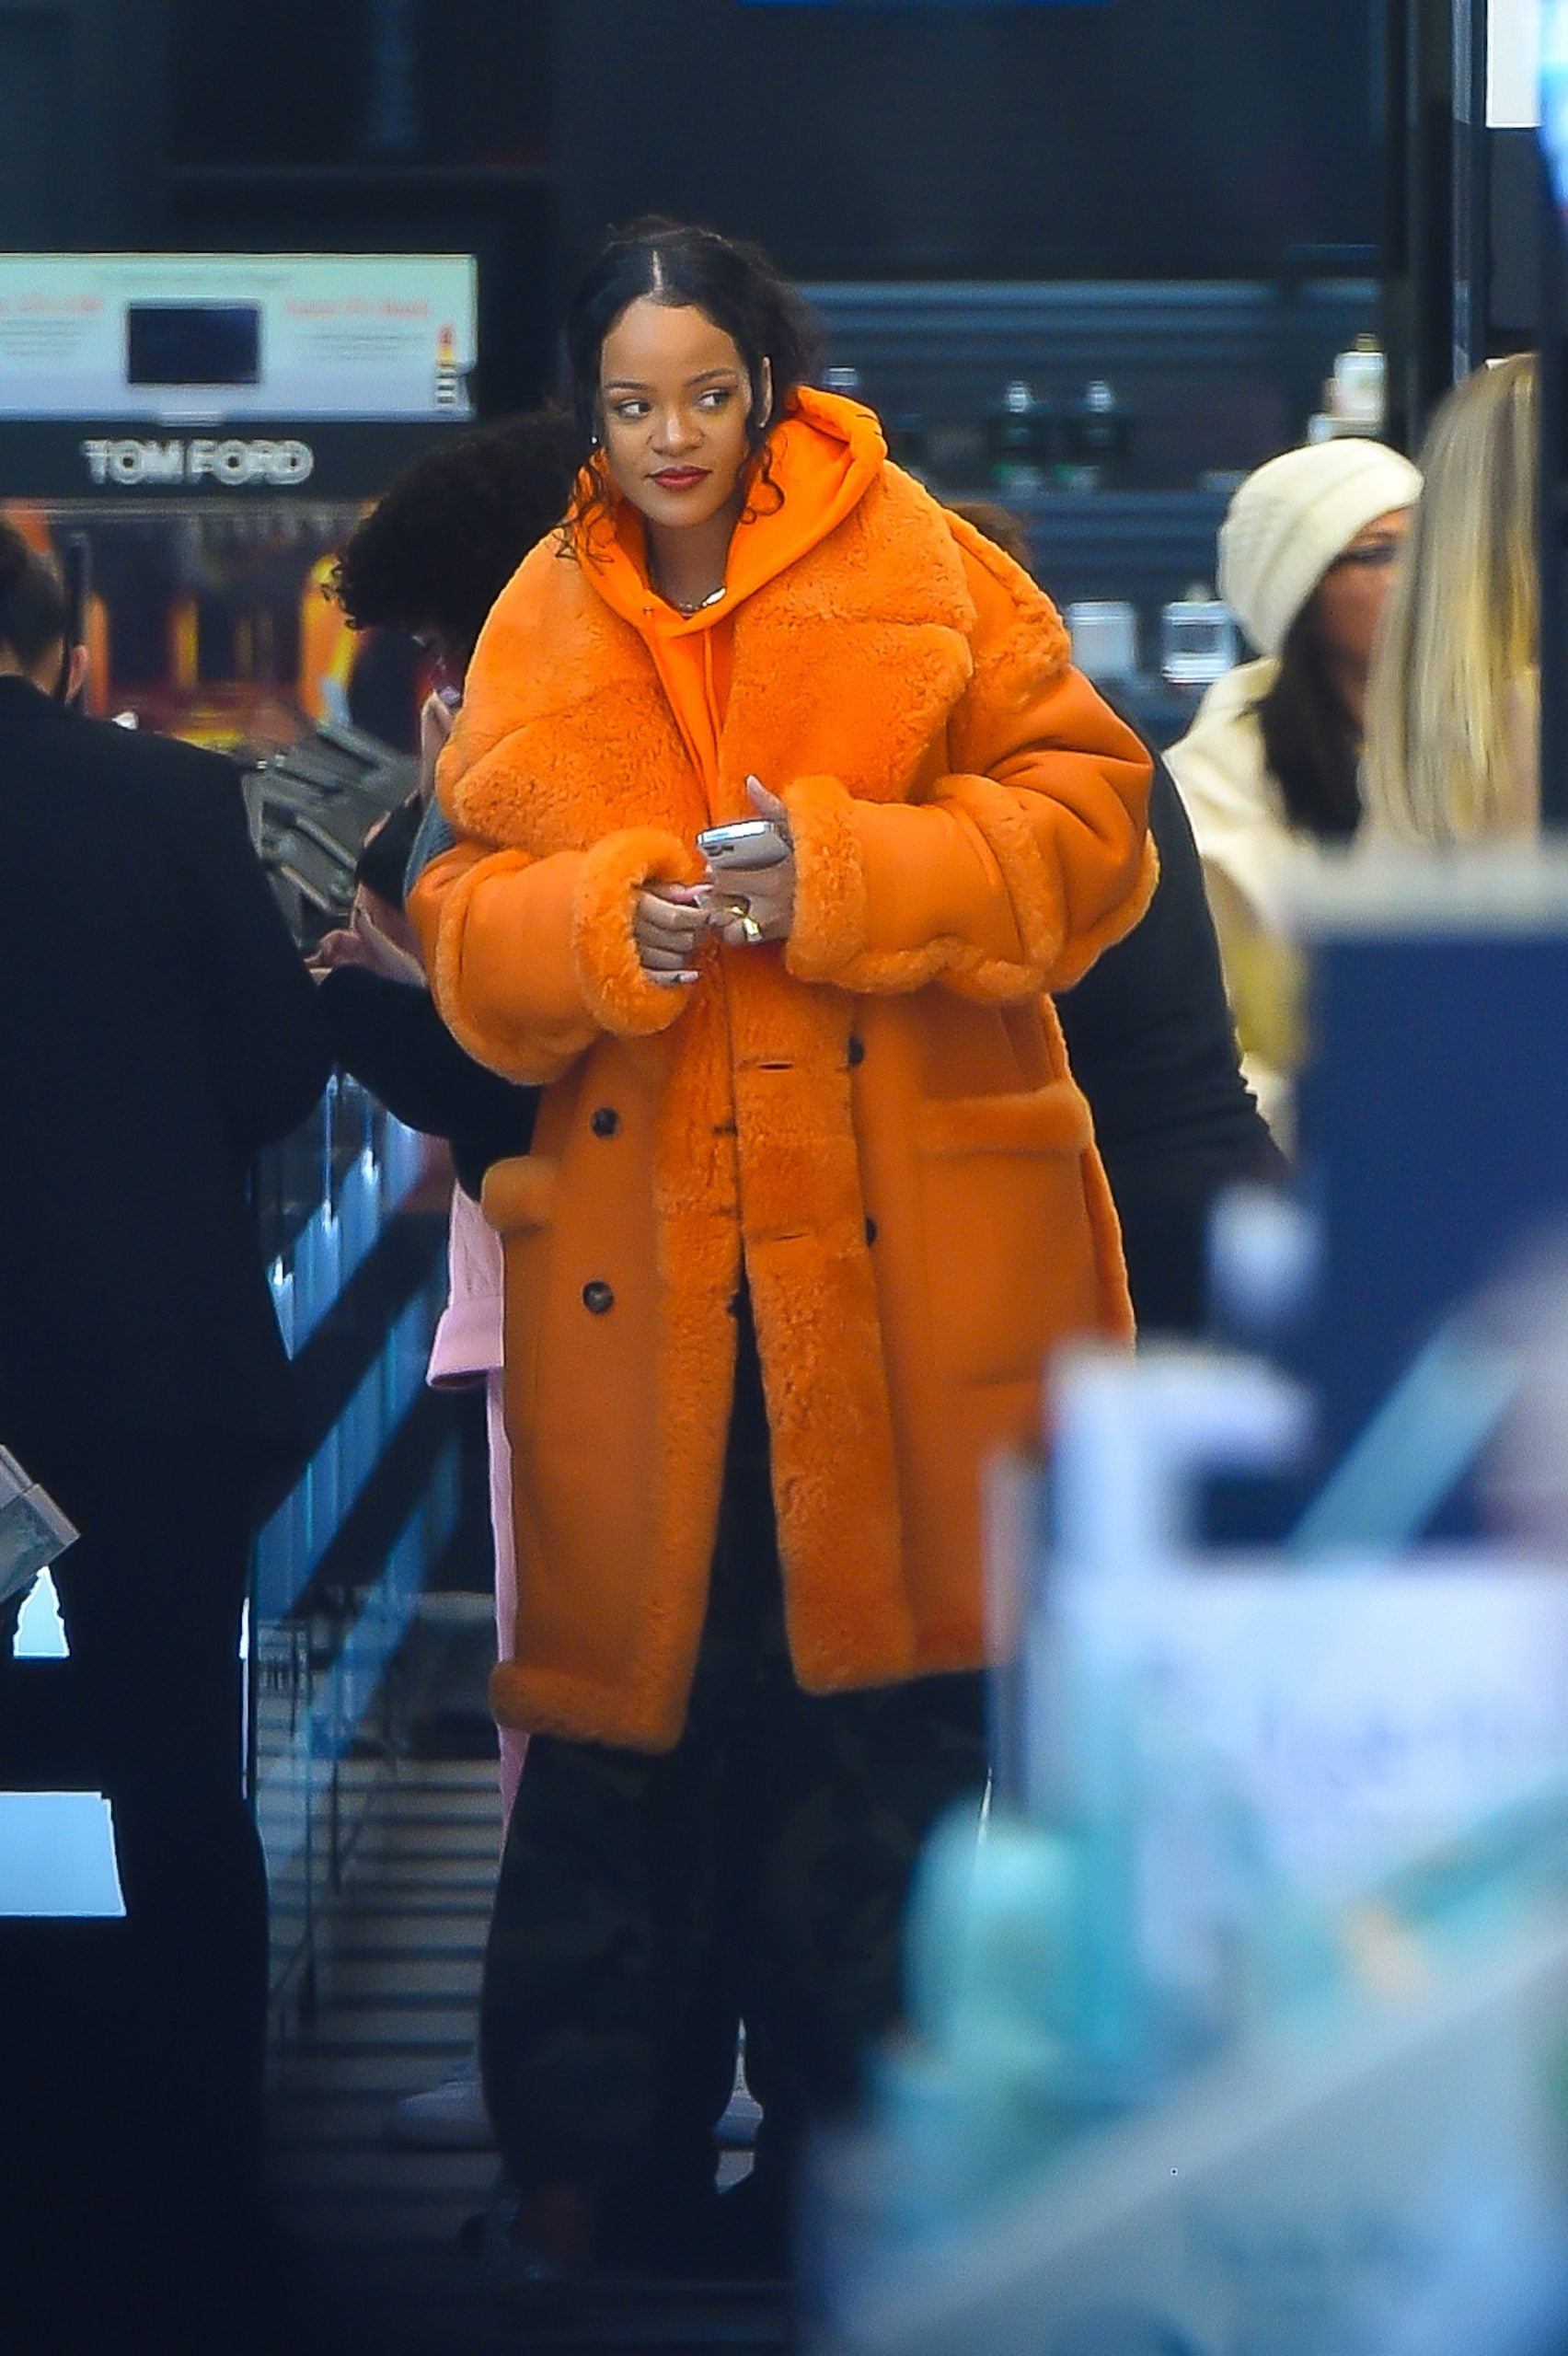 Rihanna Returns to Her Hotel After Day Out in NYC: Photo 4924550, Pregnant  Celebrities, Rihanna Photos